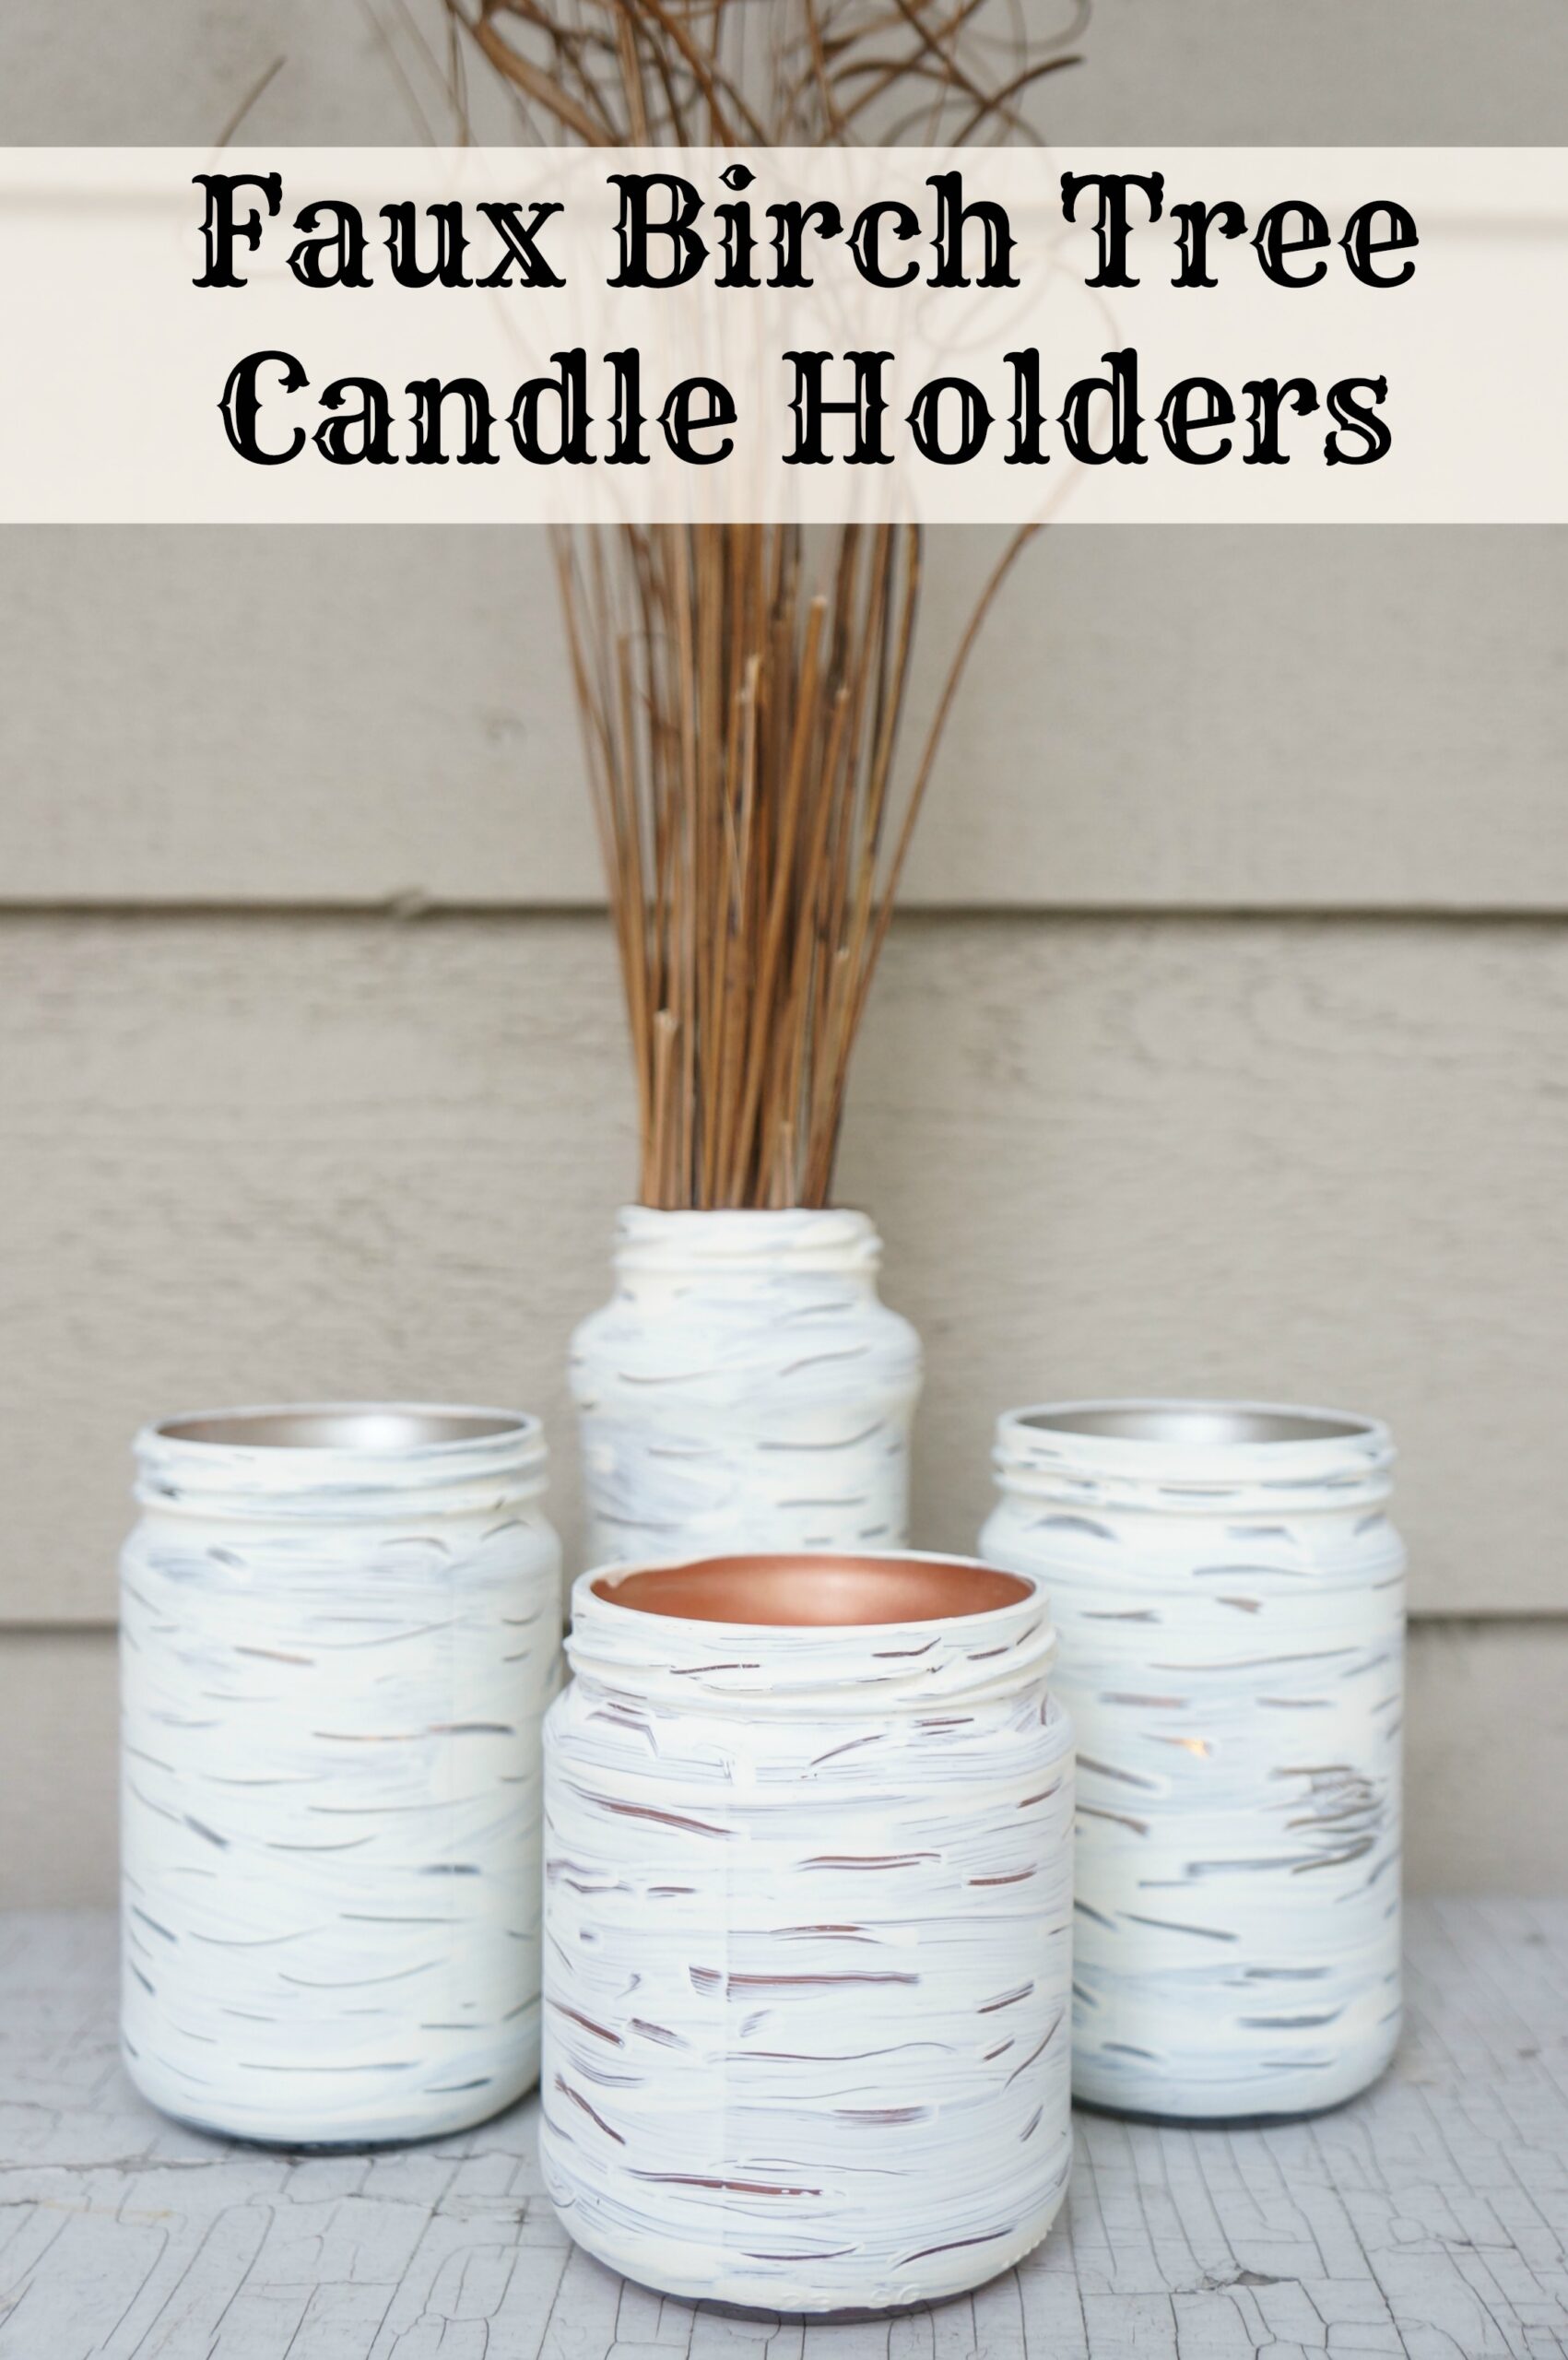 Faux Birch Tree Candle Holders